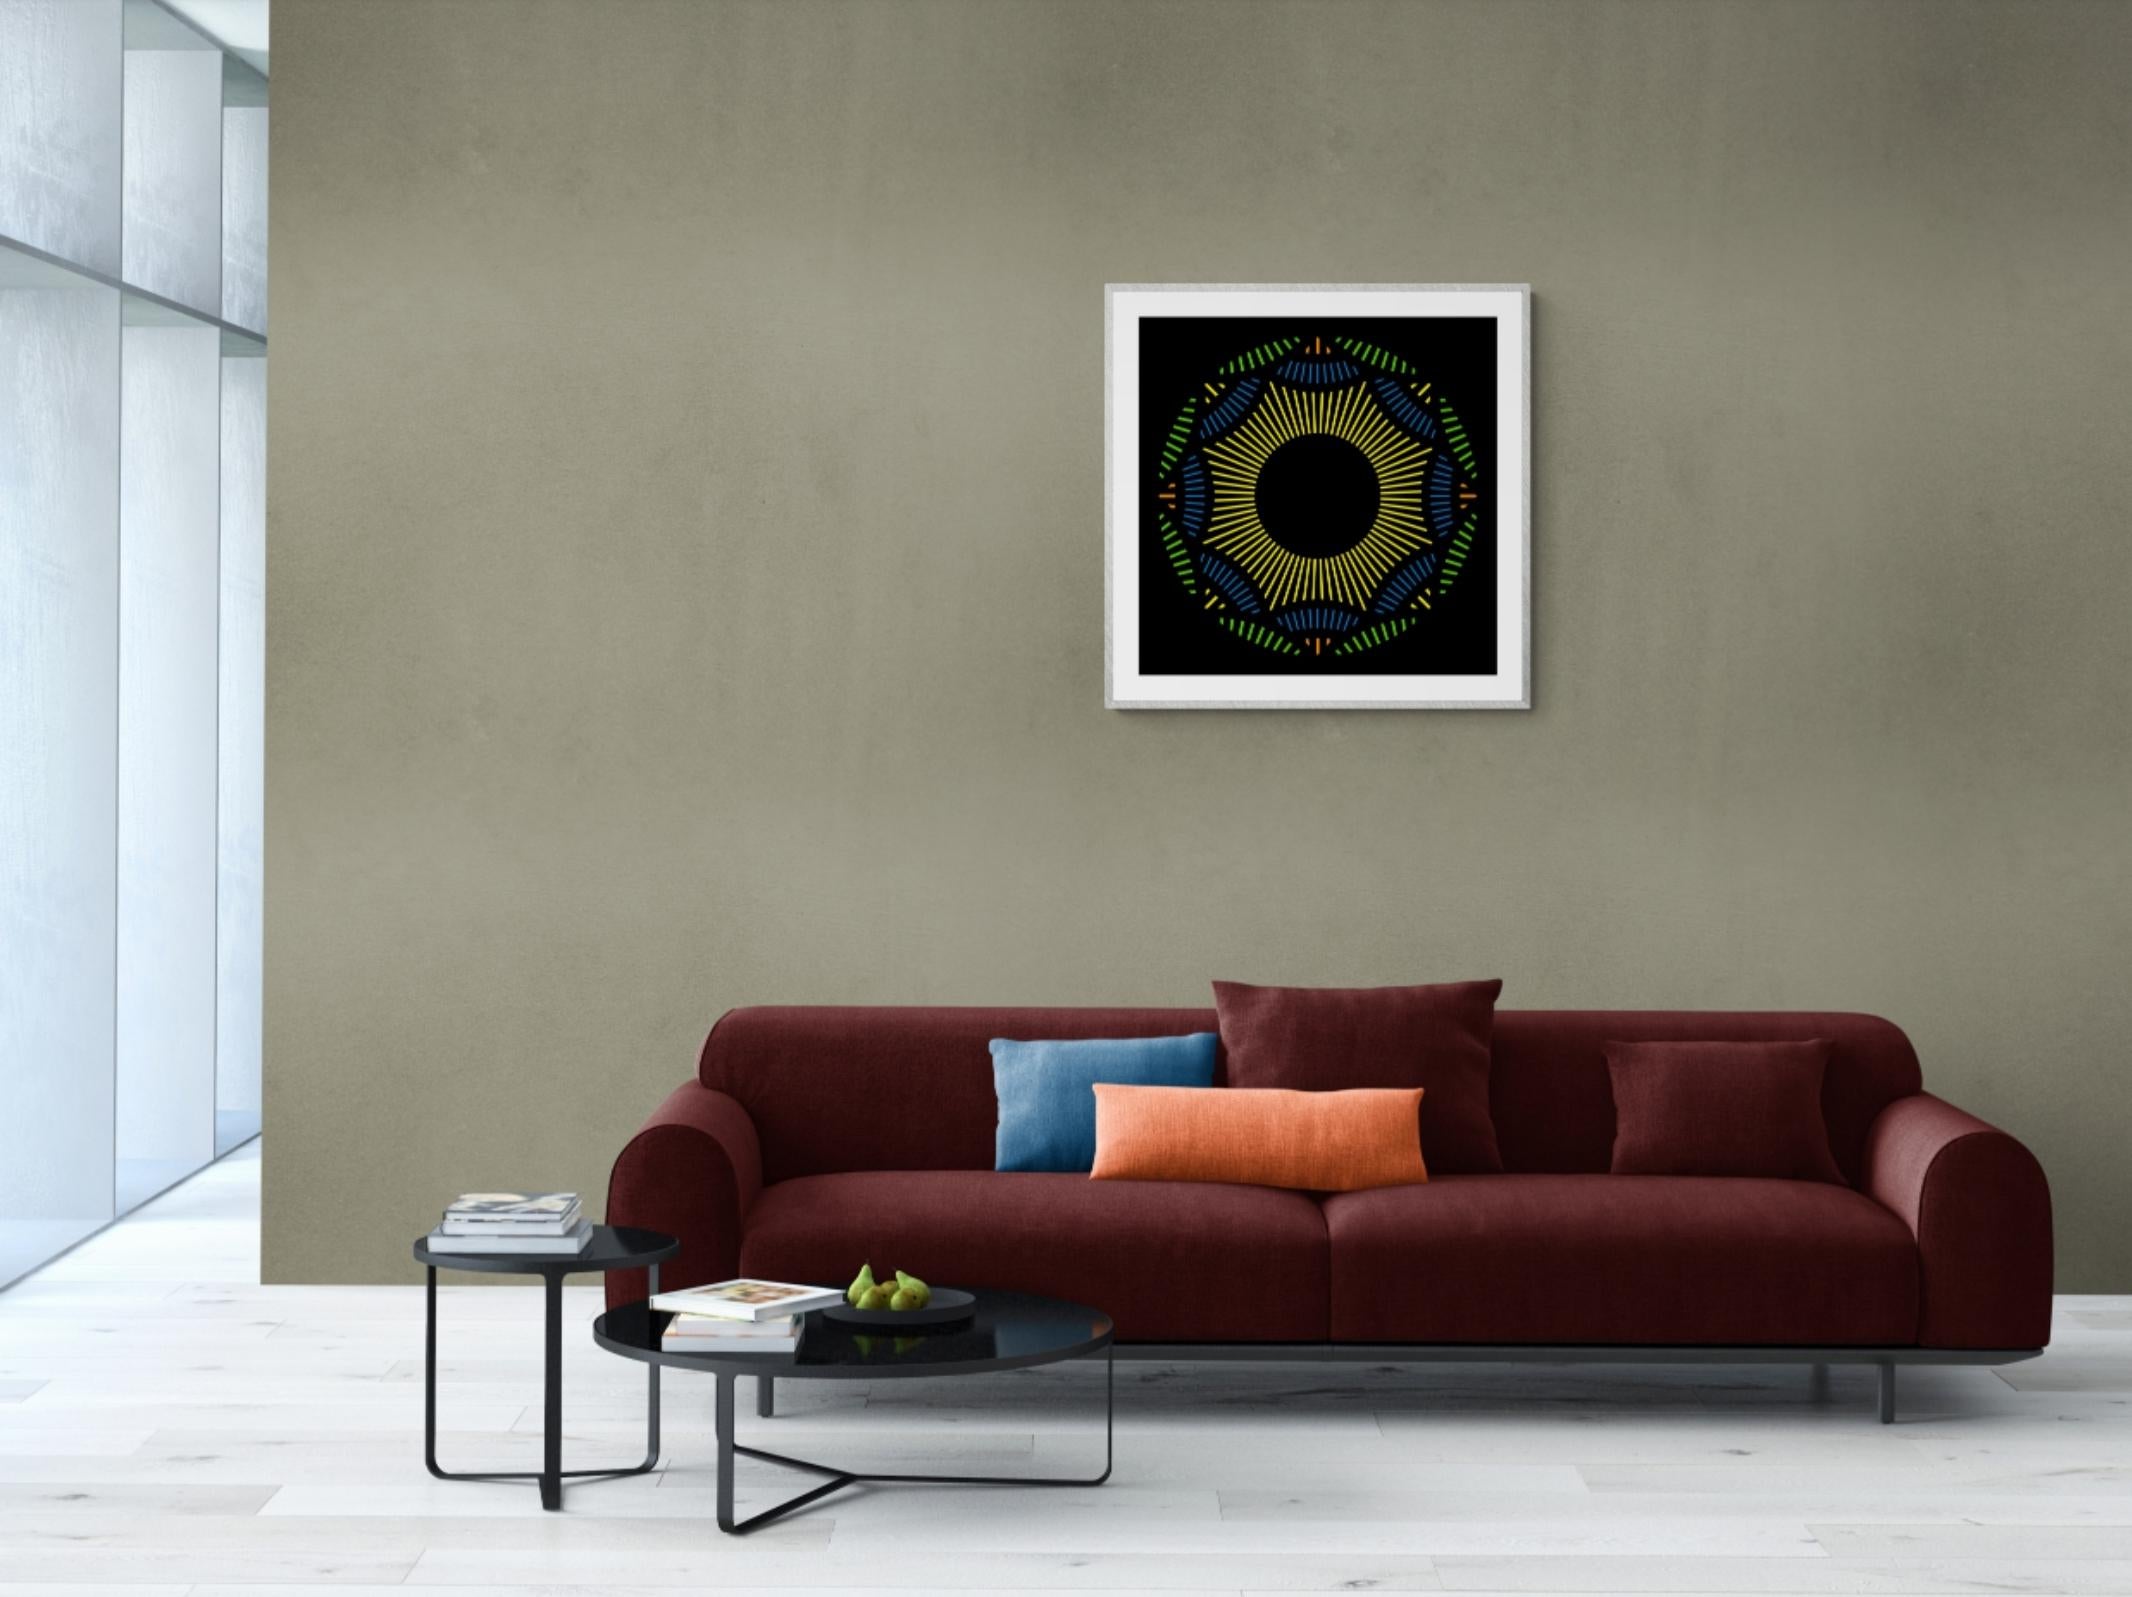 Nebulosa 4 - Abstract Geometric Print by Julio Campos